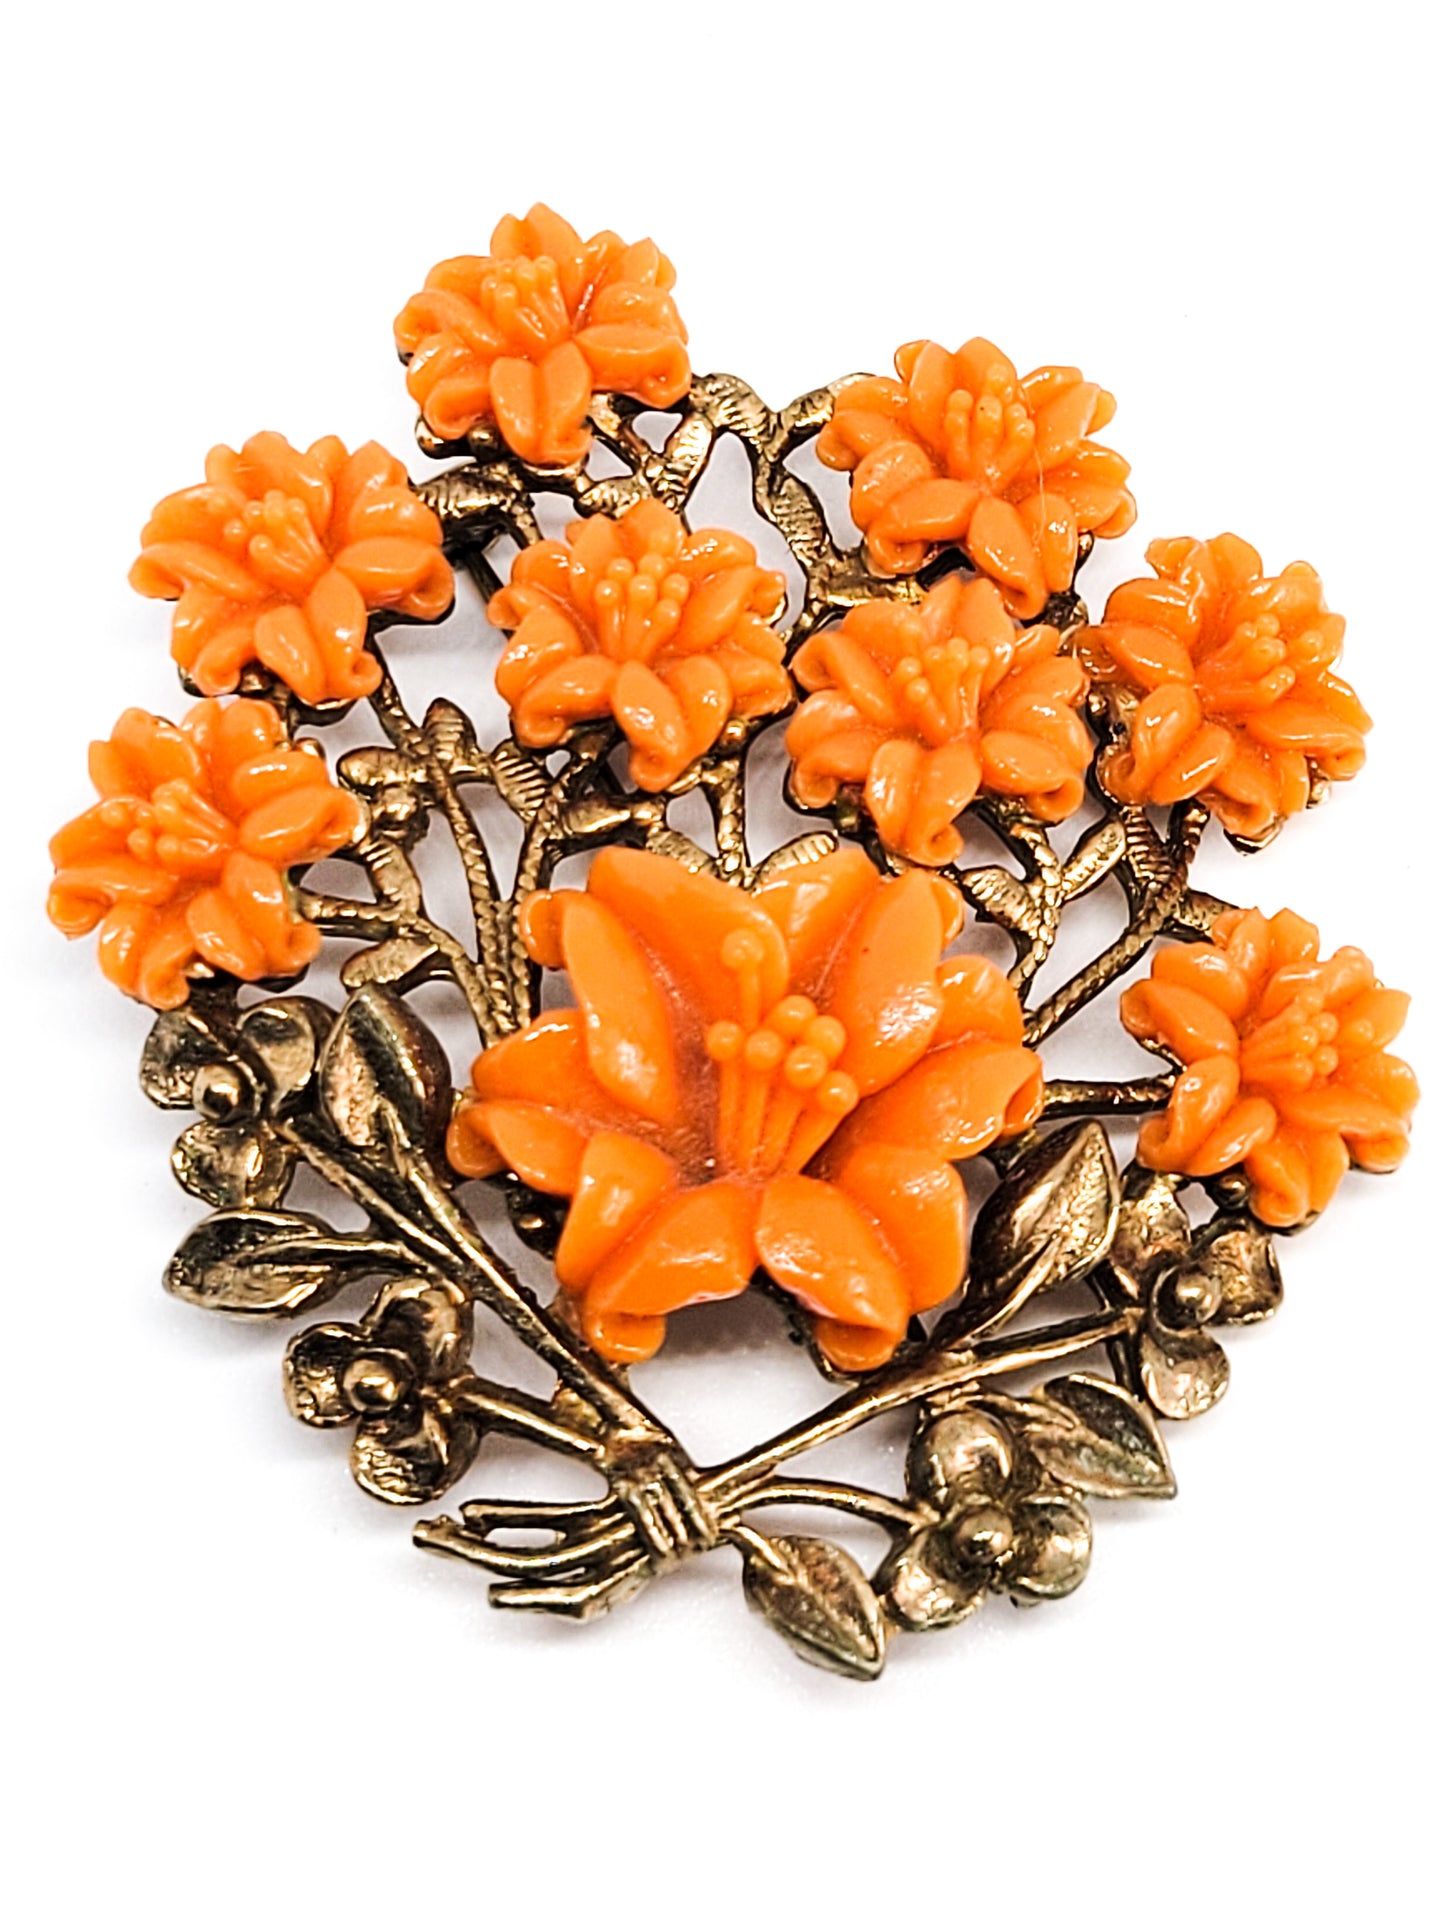 Coral molded celluloid vintage mid century flower brooch